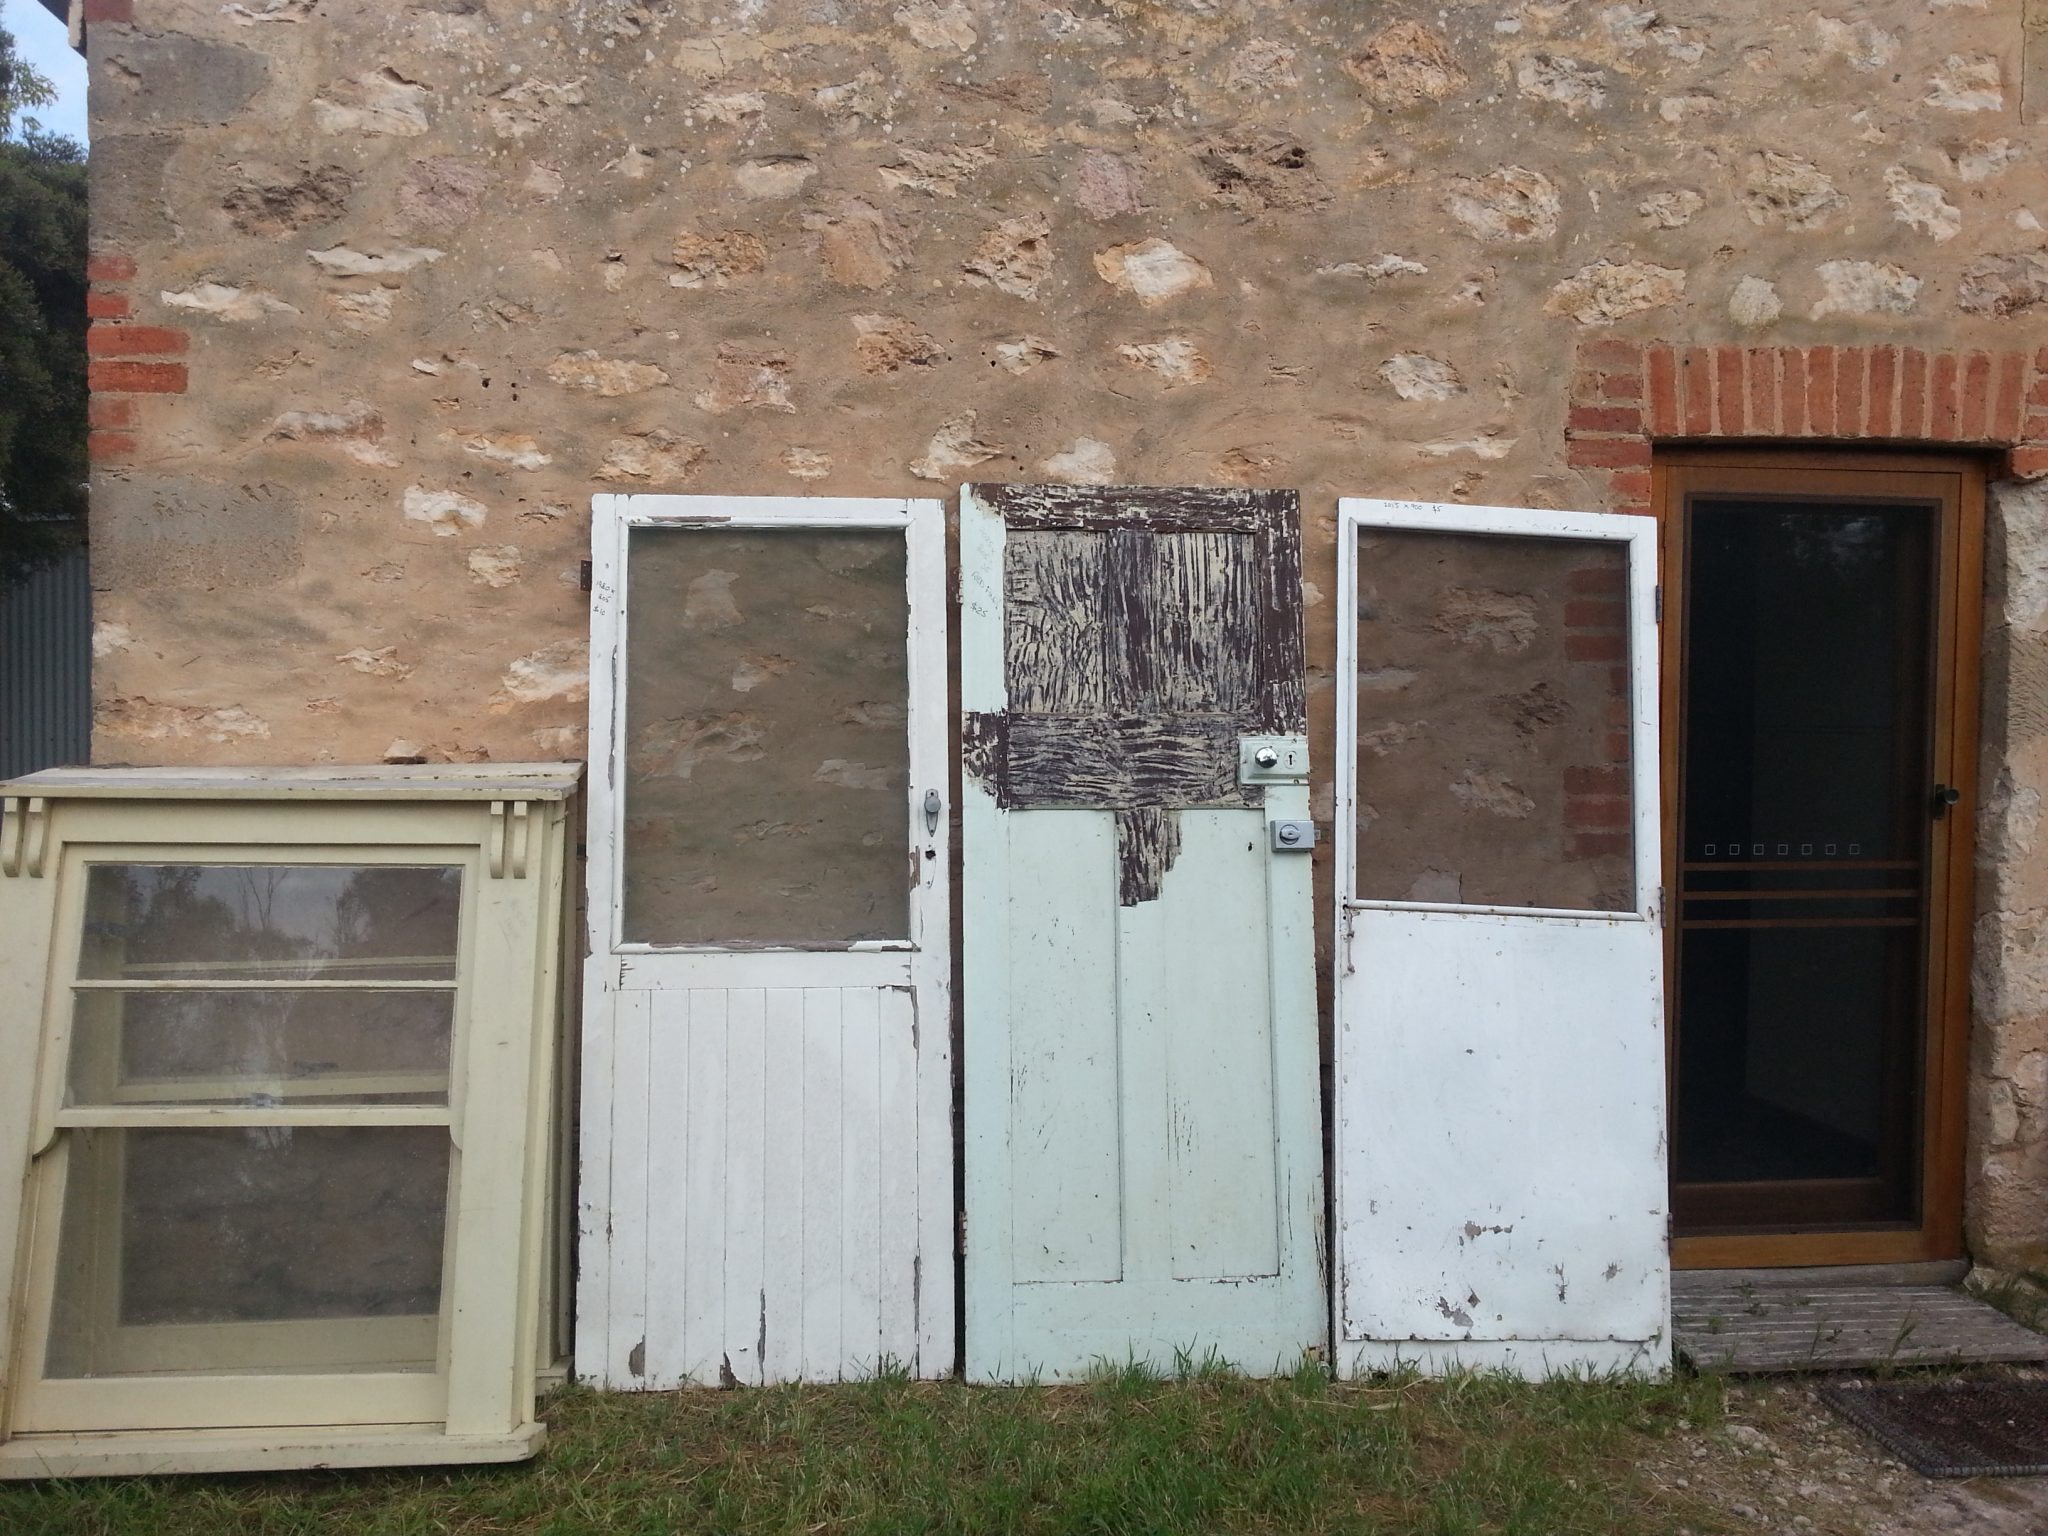 Garage Sales are a great place to find old doors and windows for upcycling